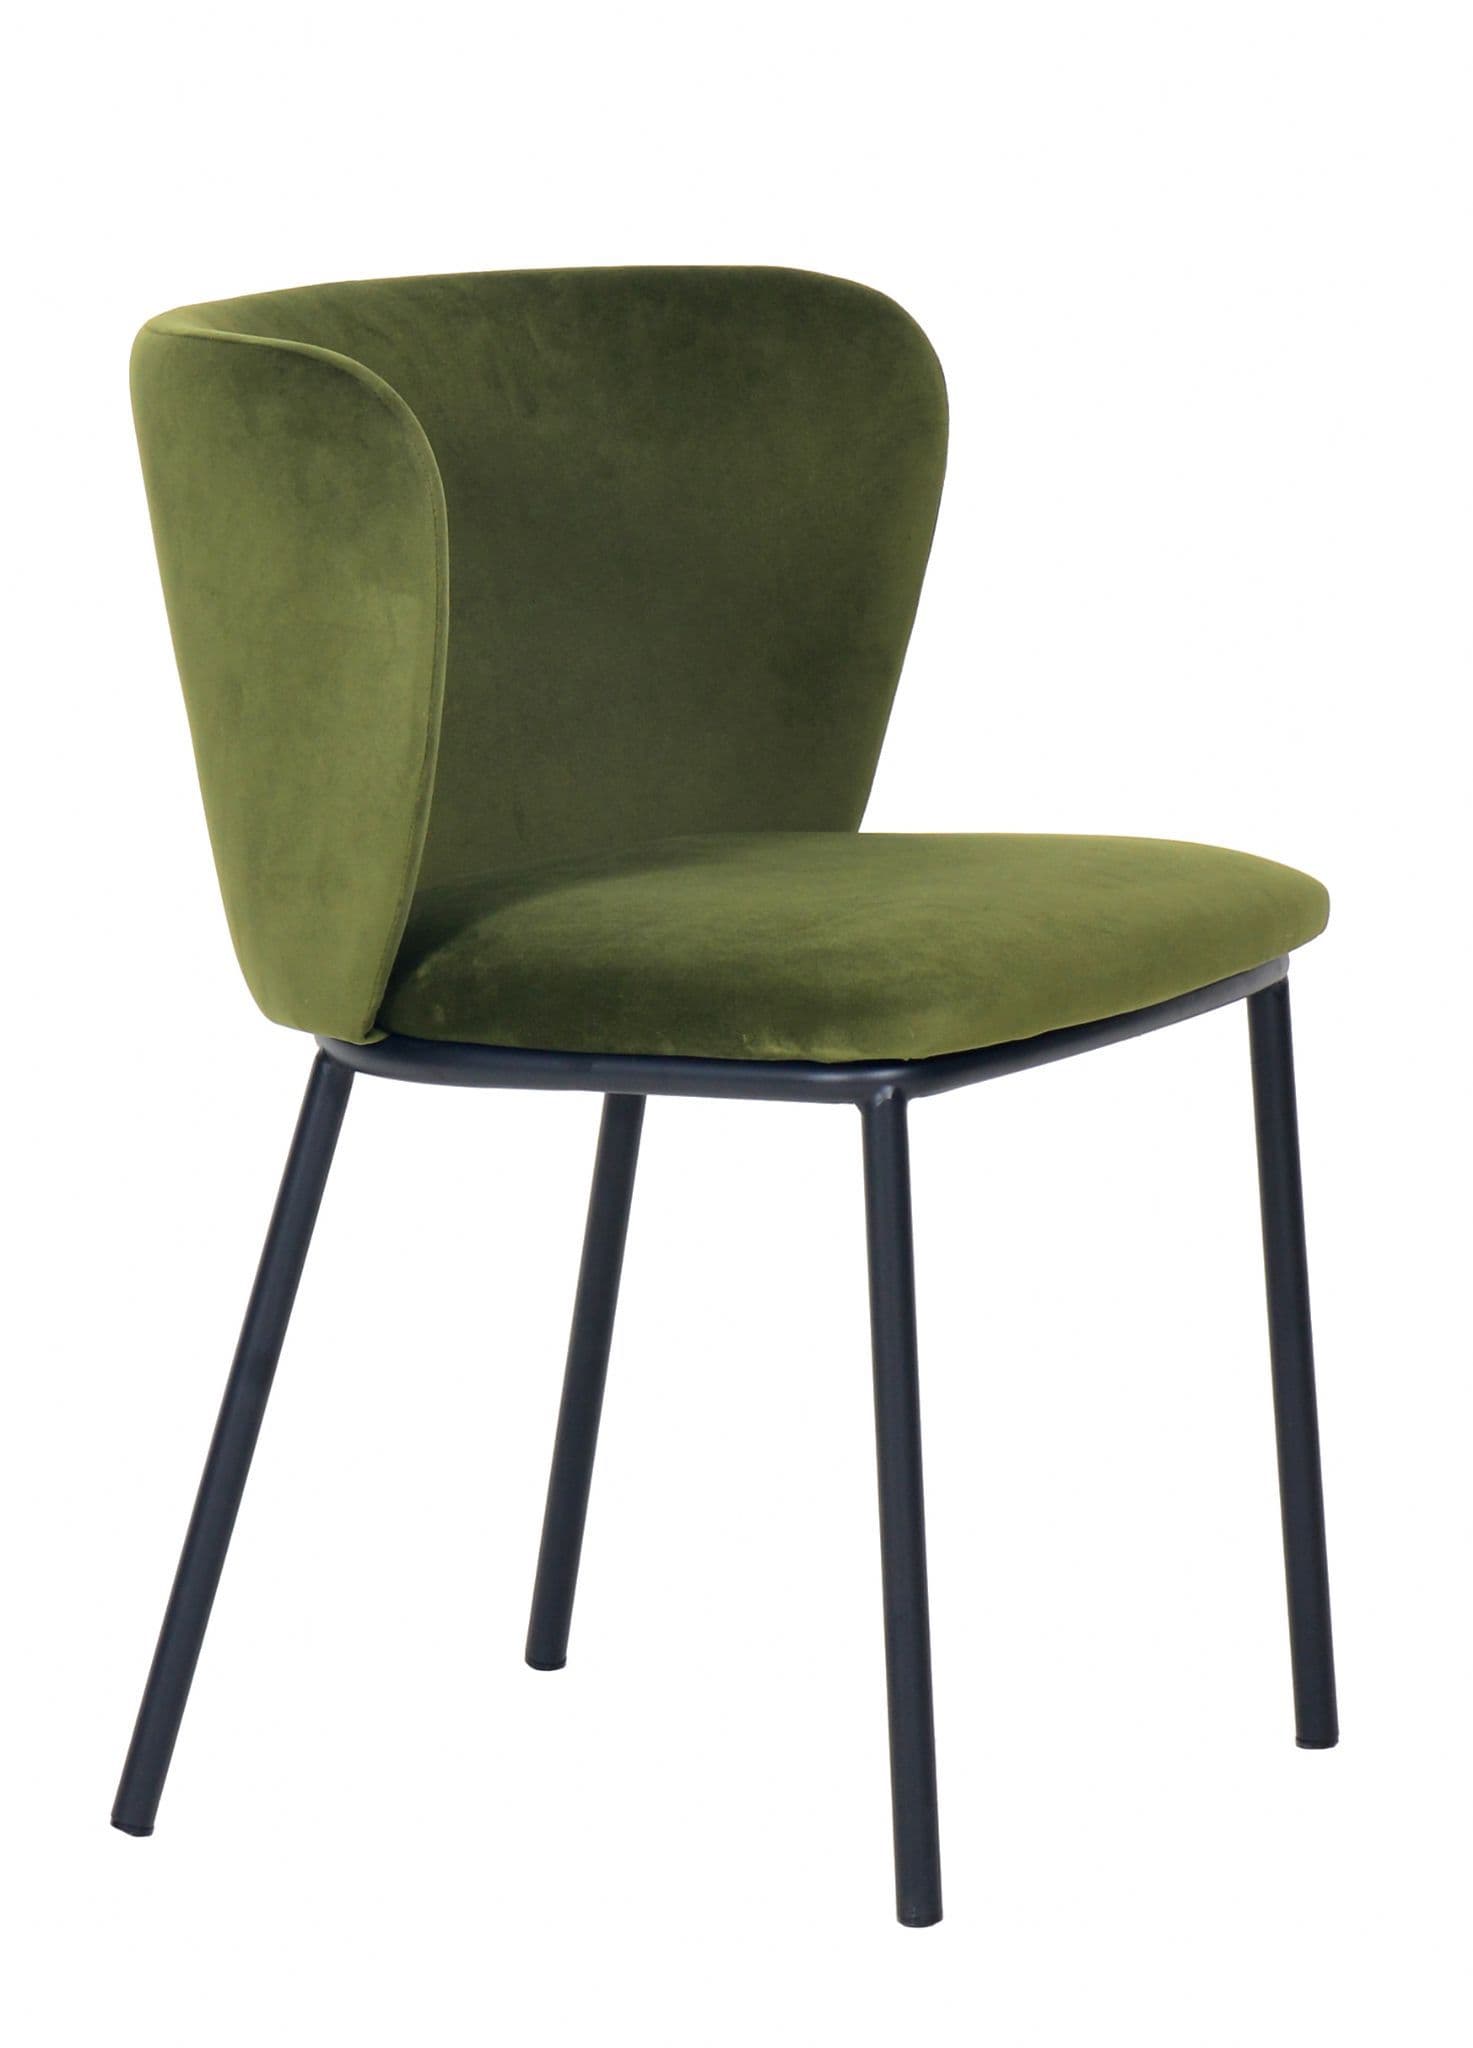 Pair of deep green velvet dining chairs with back support and black metal legs